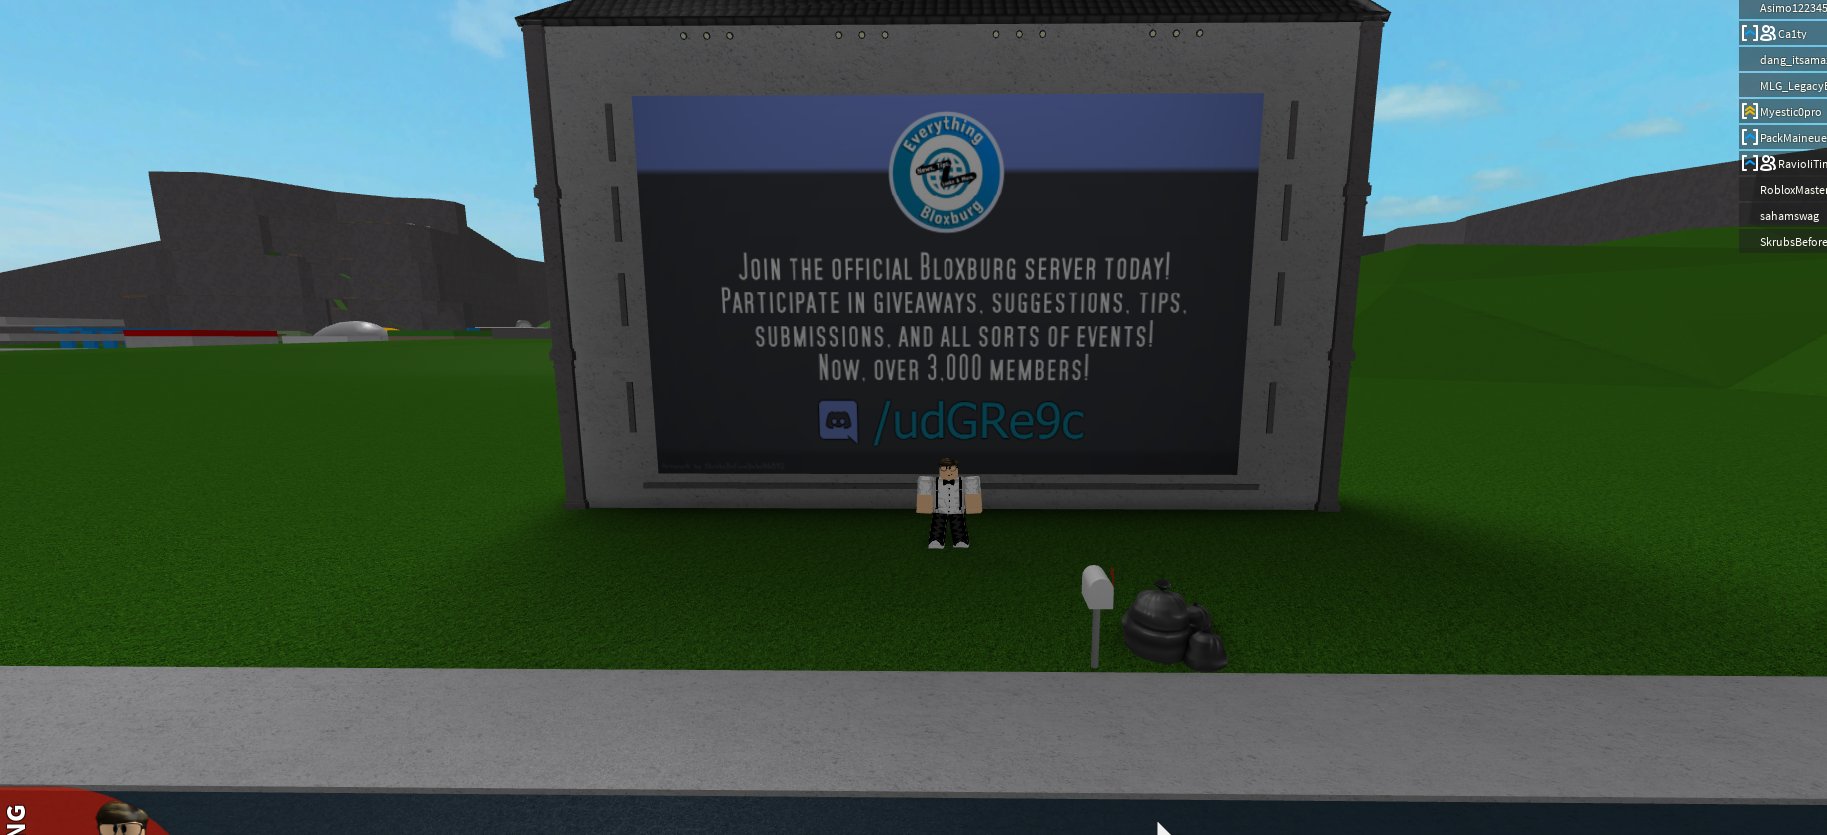 Skrubsbeforedubs Nick On Twitter Bloxburgnews Rbx Coeptus I Present To You Bloxburg S Largest Billboard Advertising The Discord Server Join It Today Https T Co Abtpyfjmjd This Staggering Photo Is In 16 Different Frames 1154x709 Resolution - stephenkurtocampo on twitter difildplays give me robux